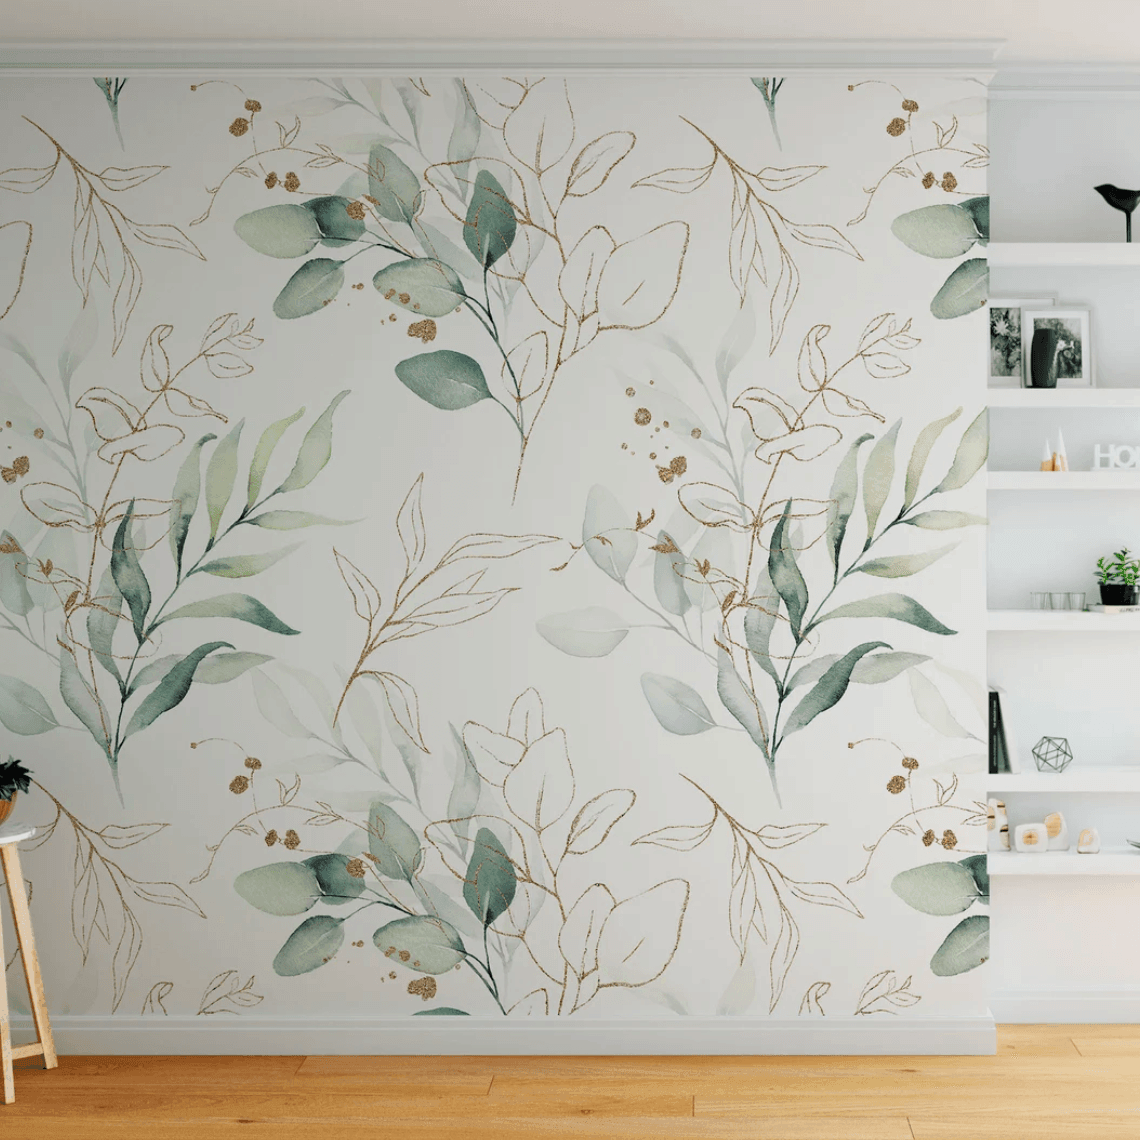 Green Eucalyptus Leaves and Branches Wallpaper Mural 